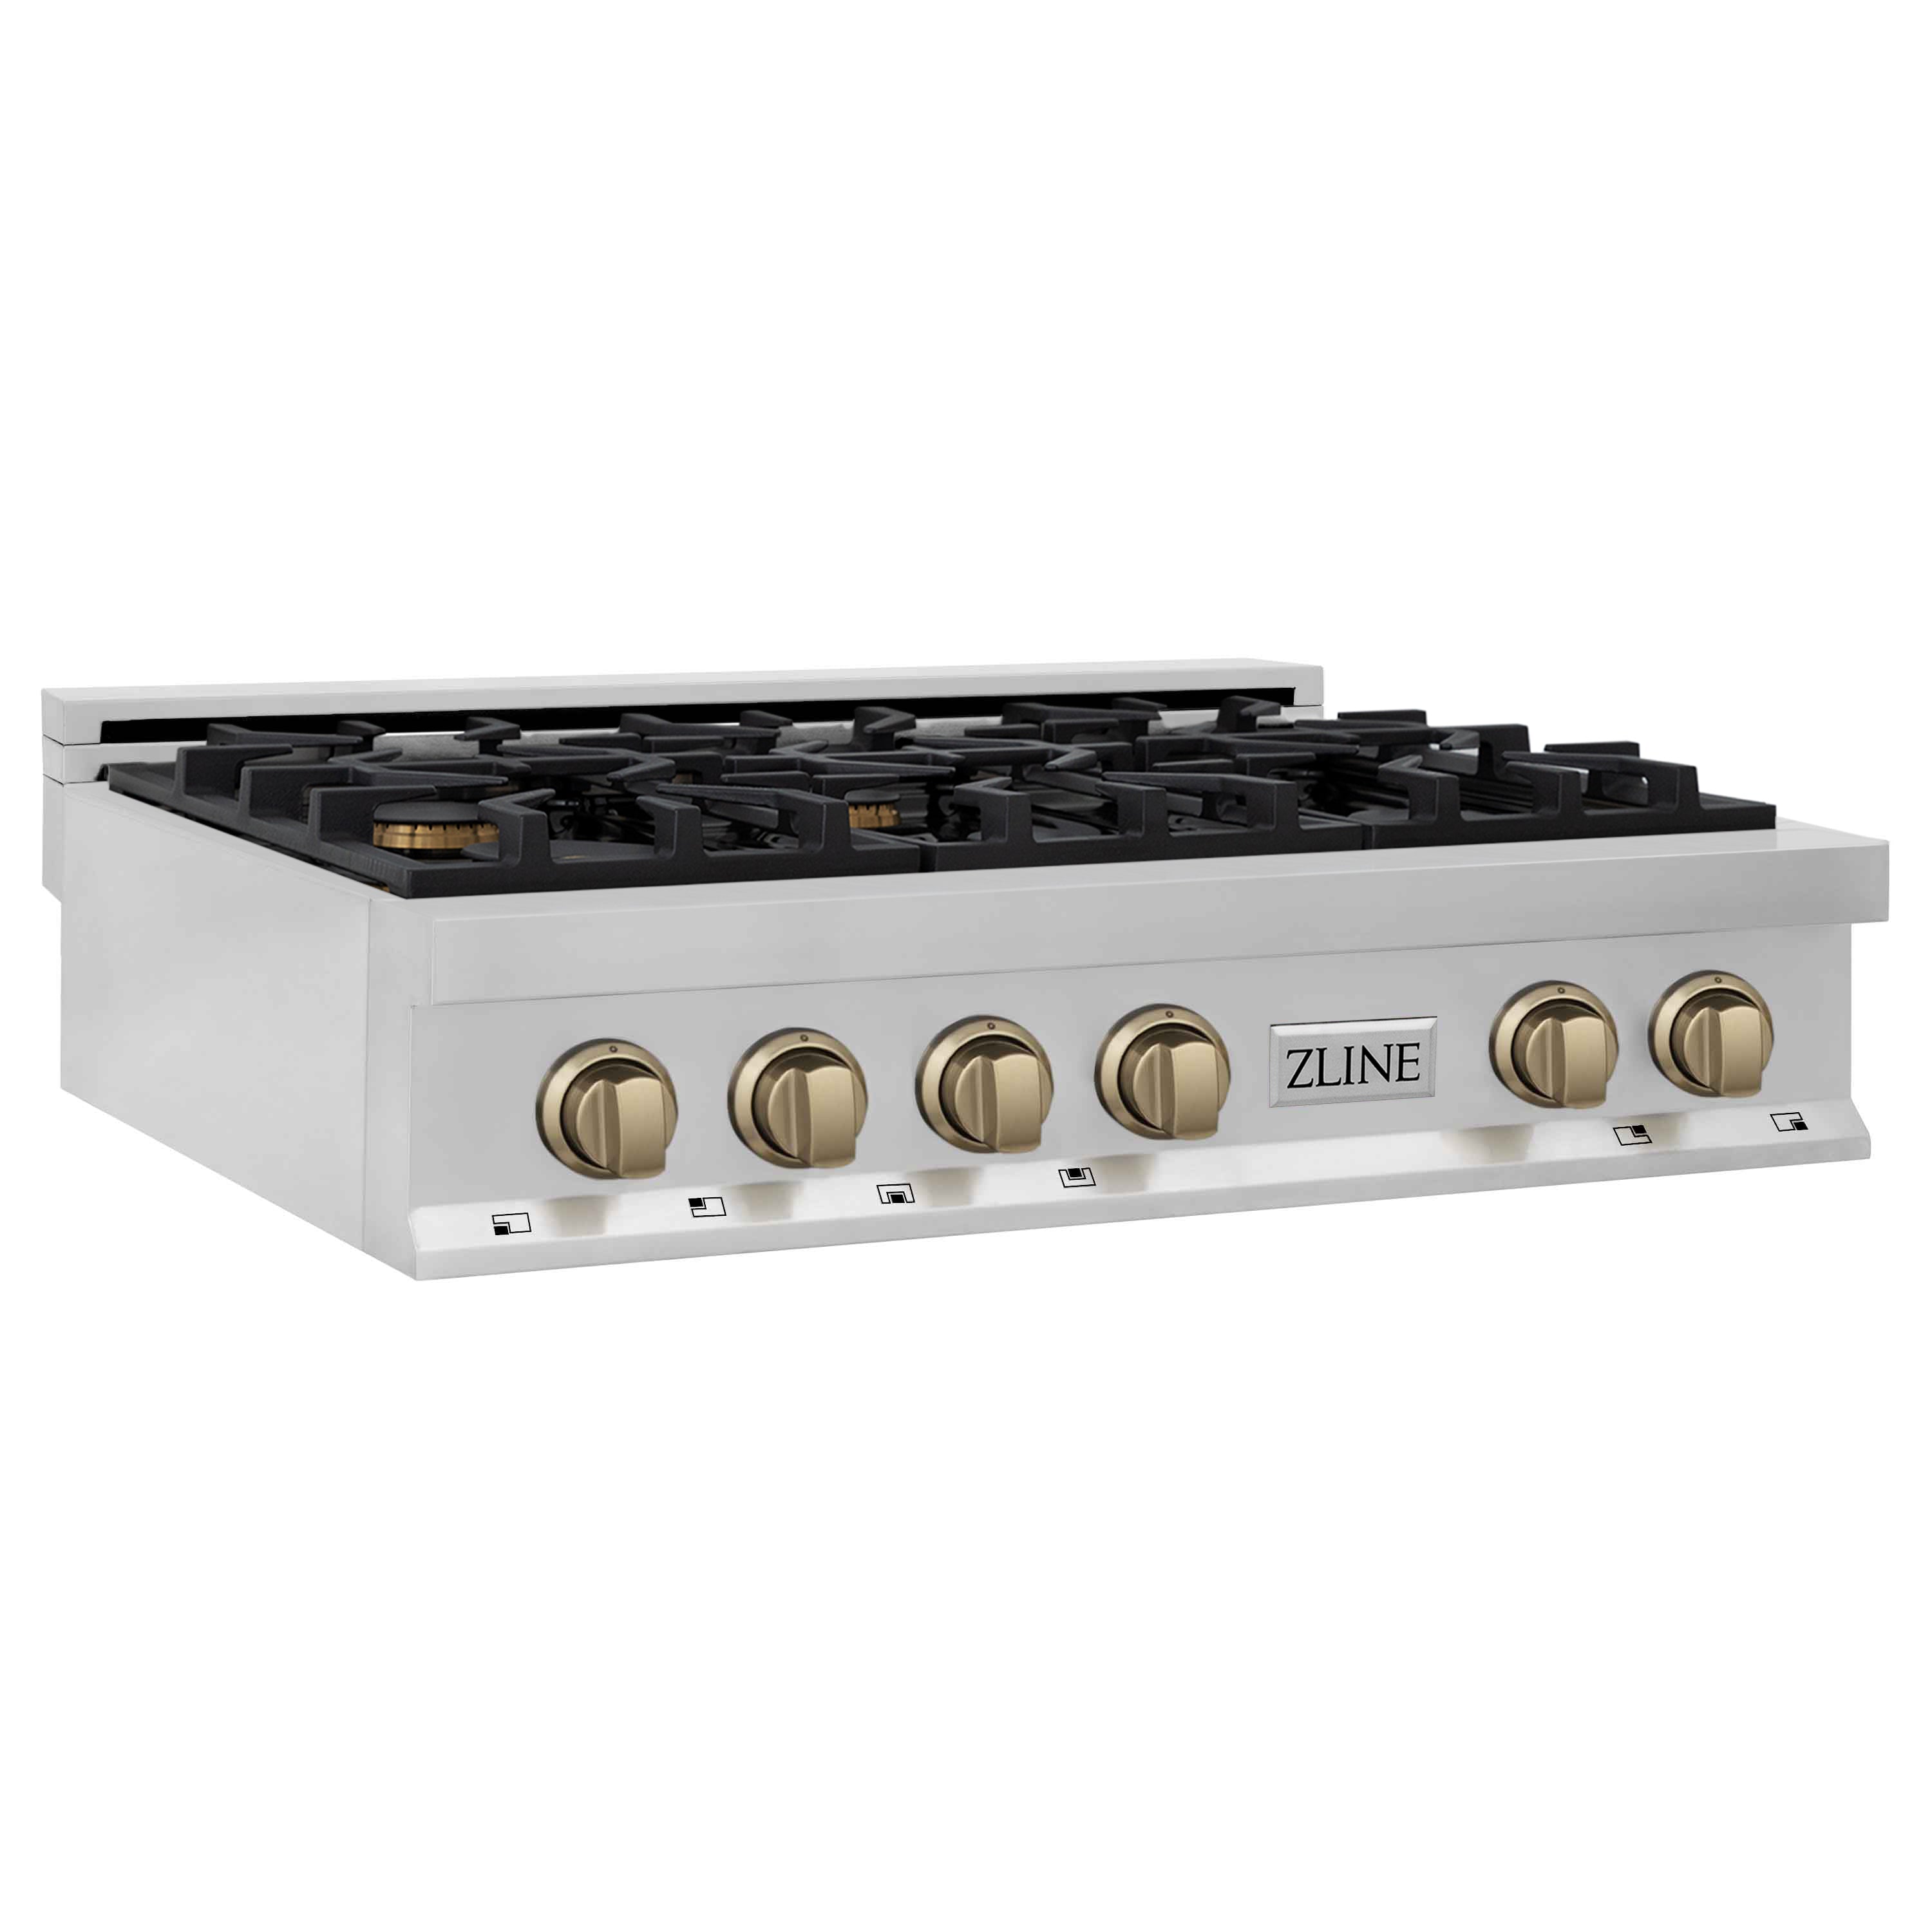 ZLINE Autograph Edition 36" Porcelain Rangetop with 6 Gas Burners in Stainless Steel and Champagne Bronze Accents (RTZ-36-CB)